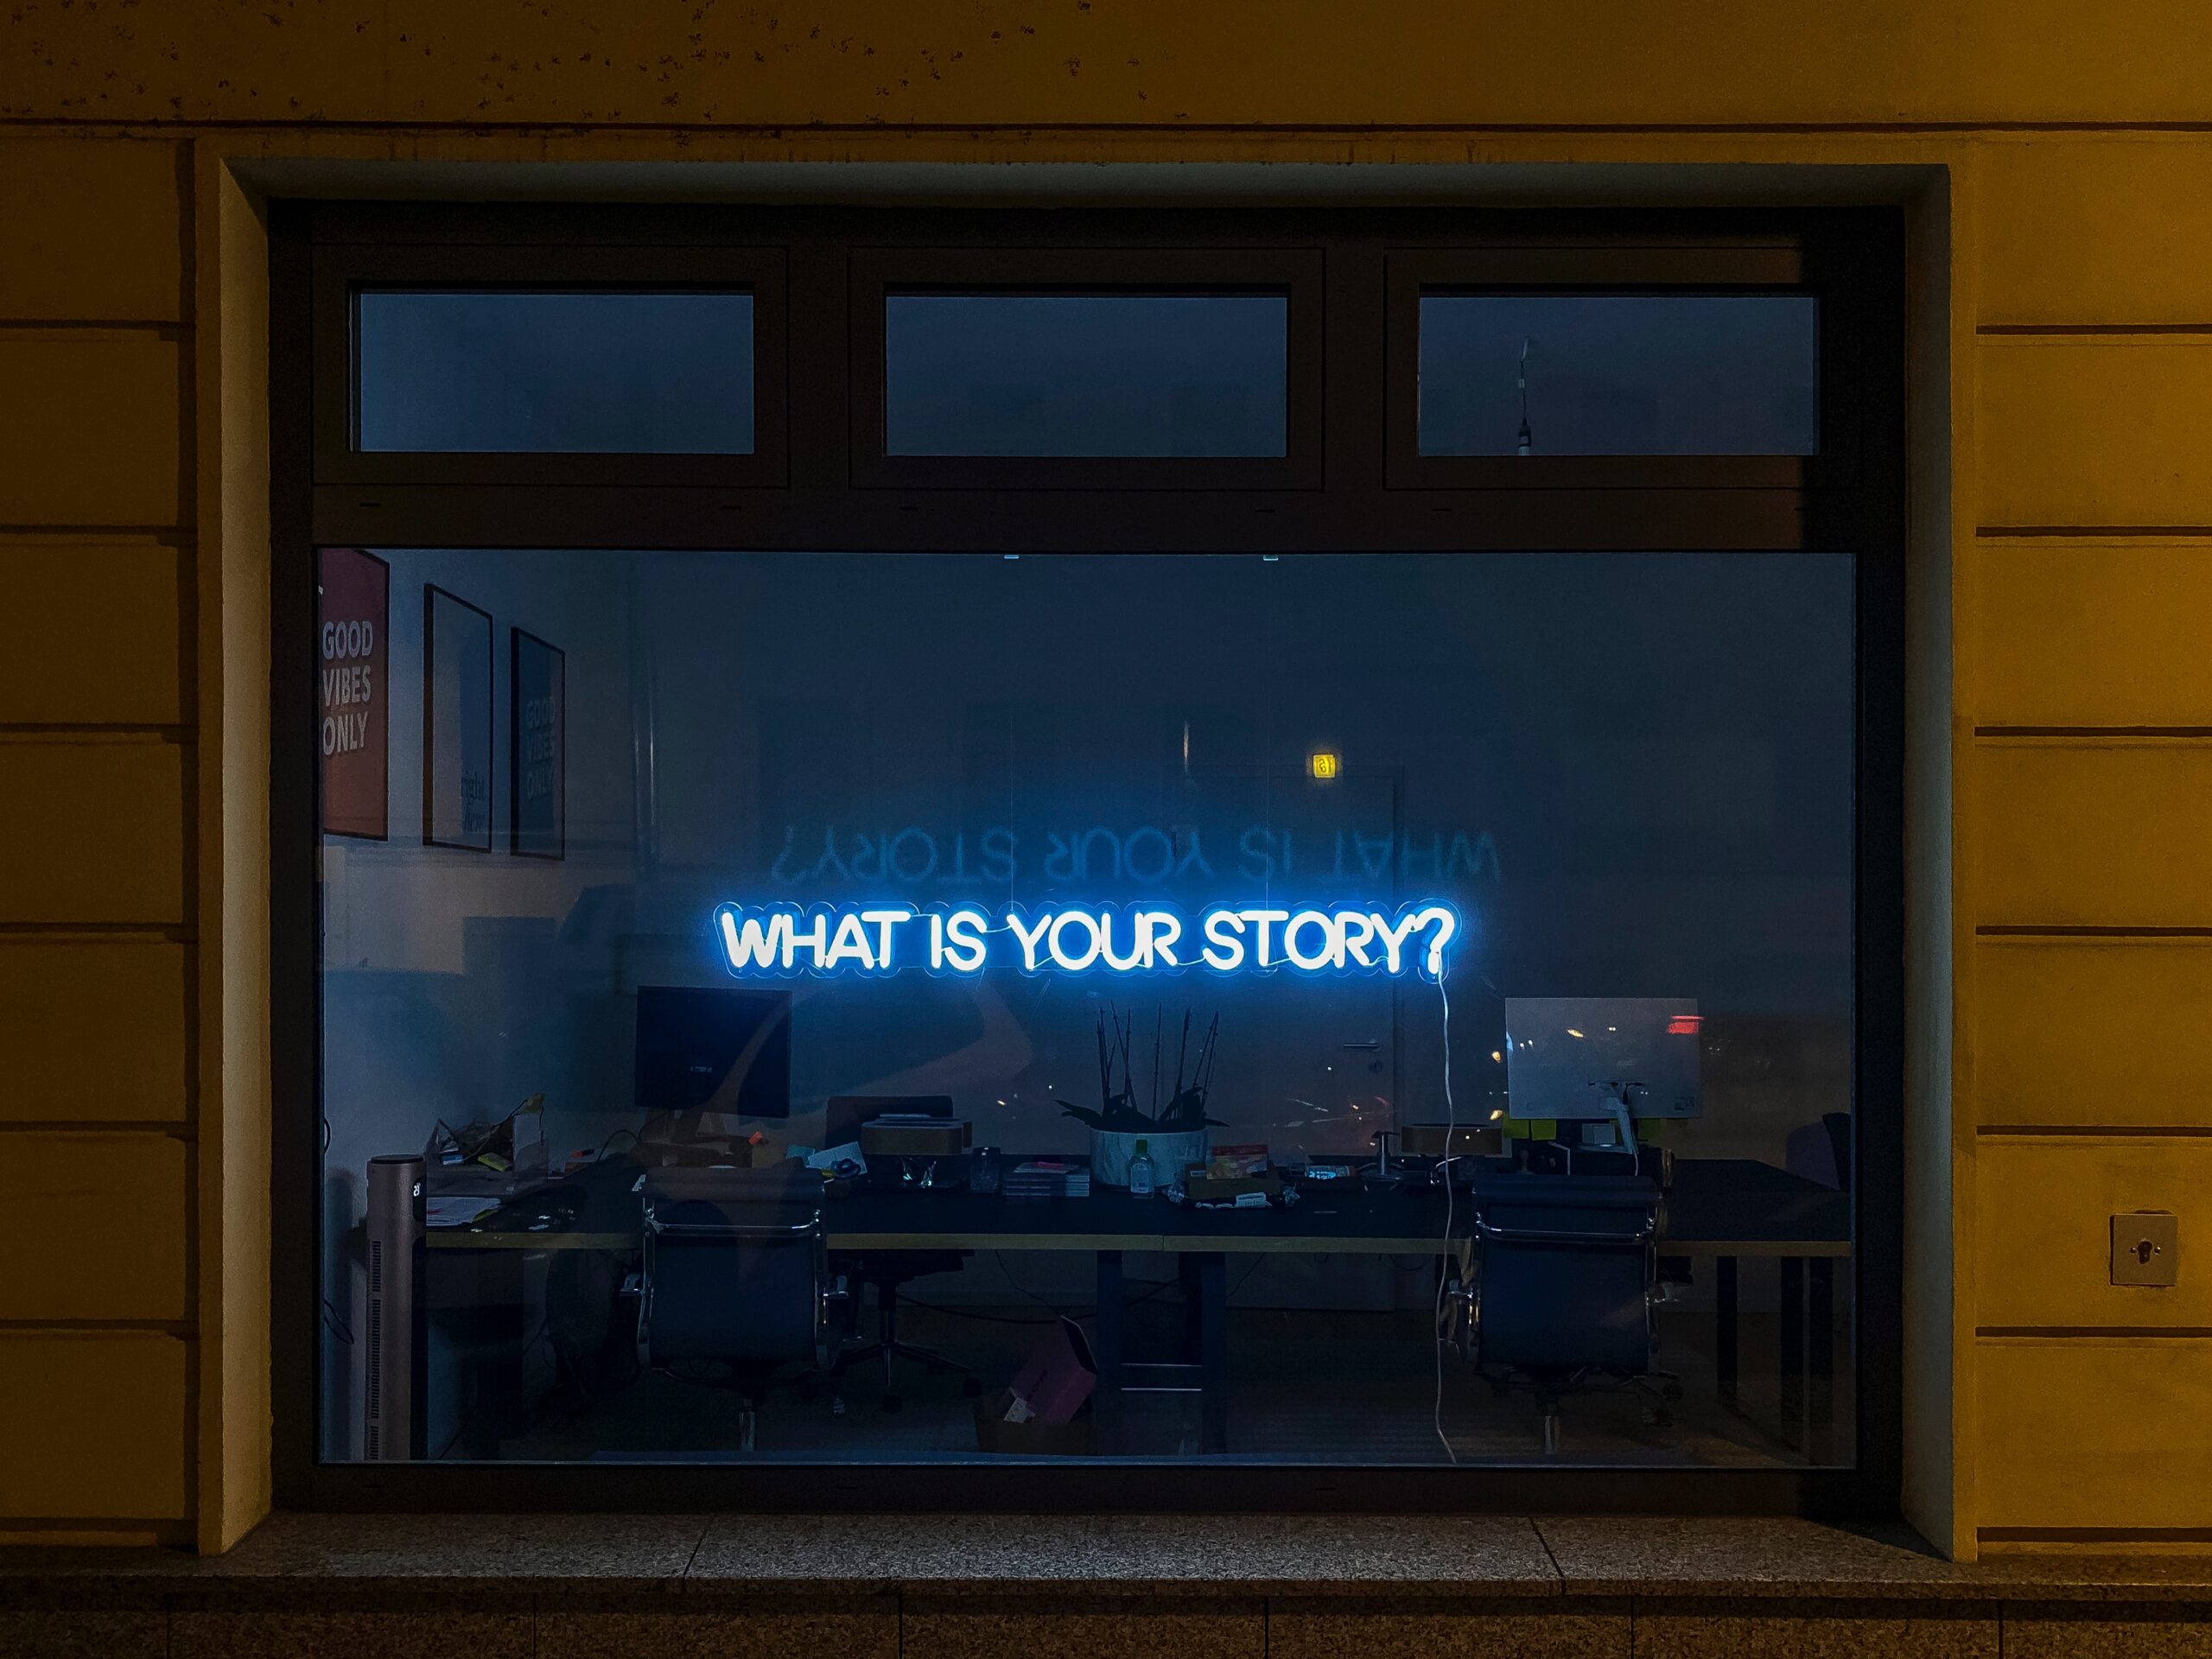 In the window of a store, there is a blue holographic light sign that reads "What's your story?"